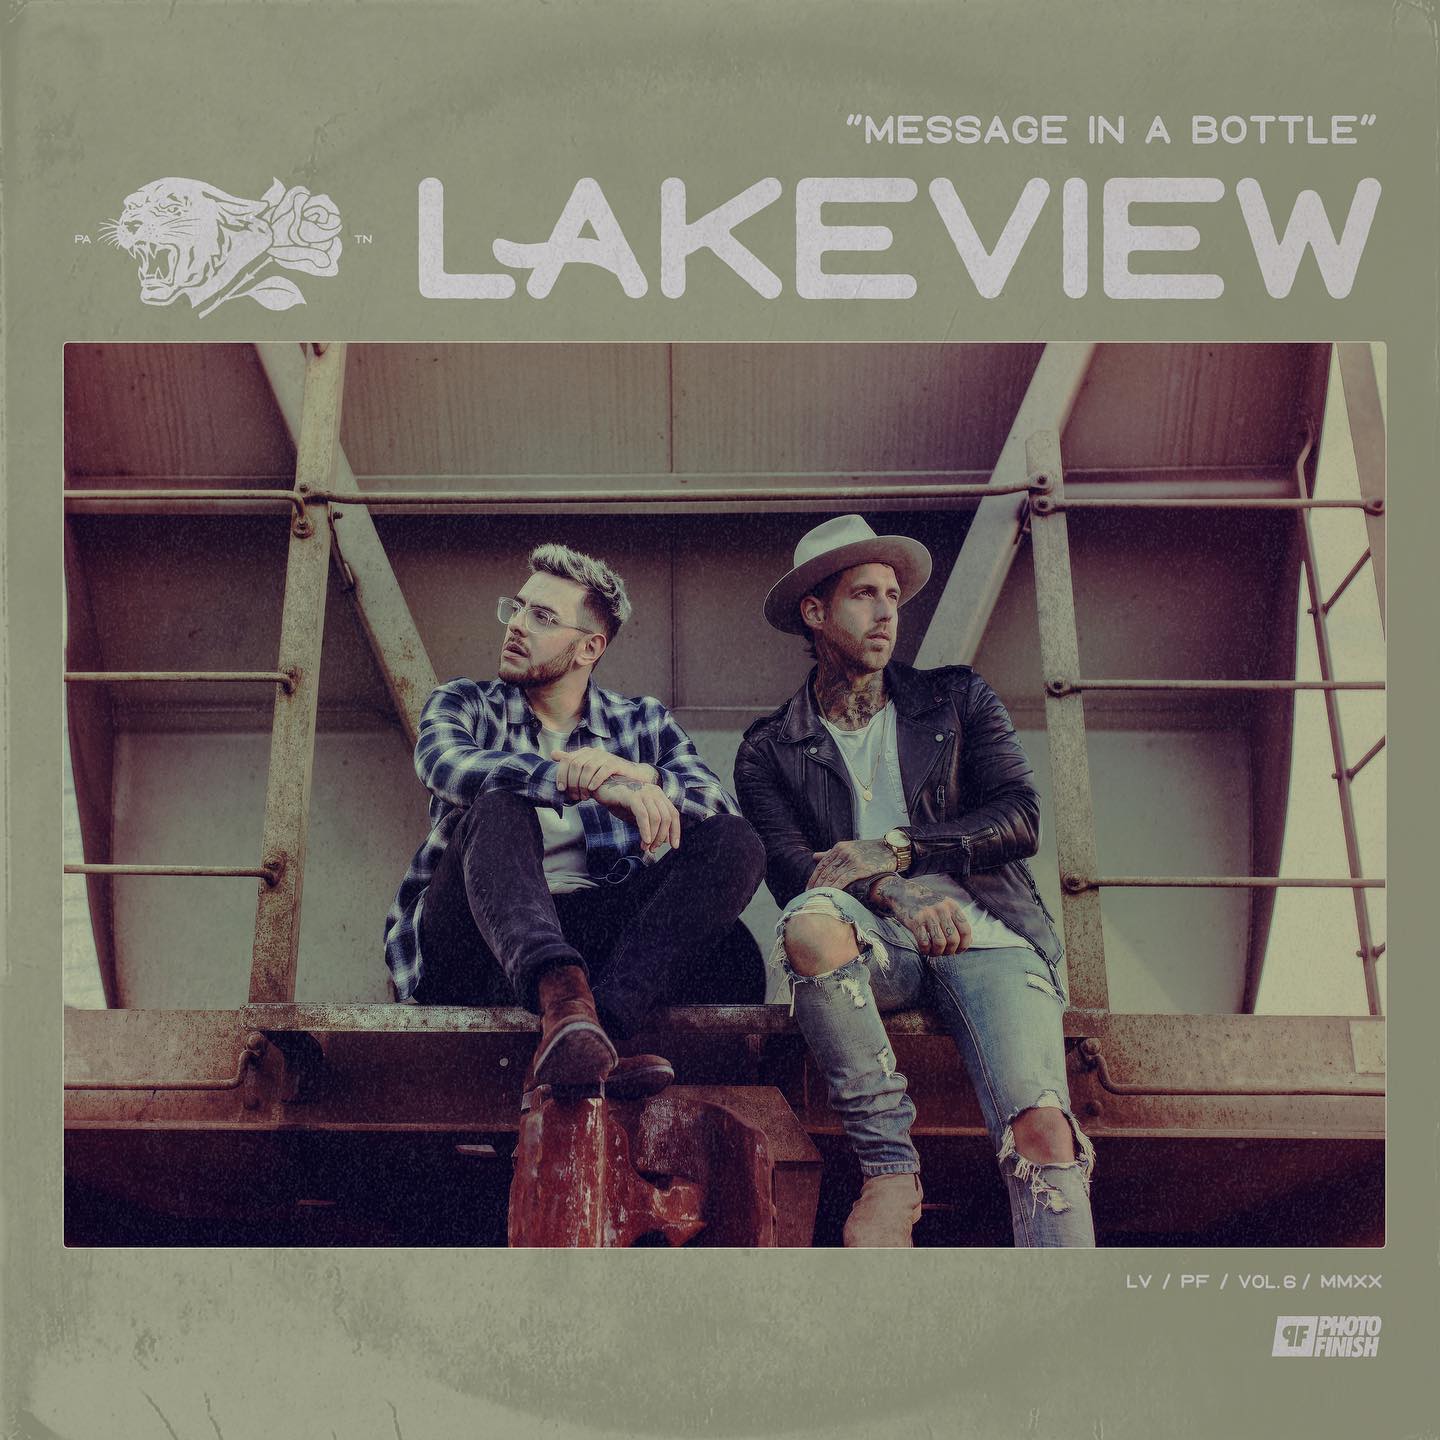 LAKEVIEW's new song "Message in a Bottle" is available now, January 28th.